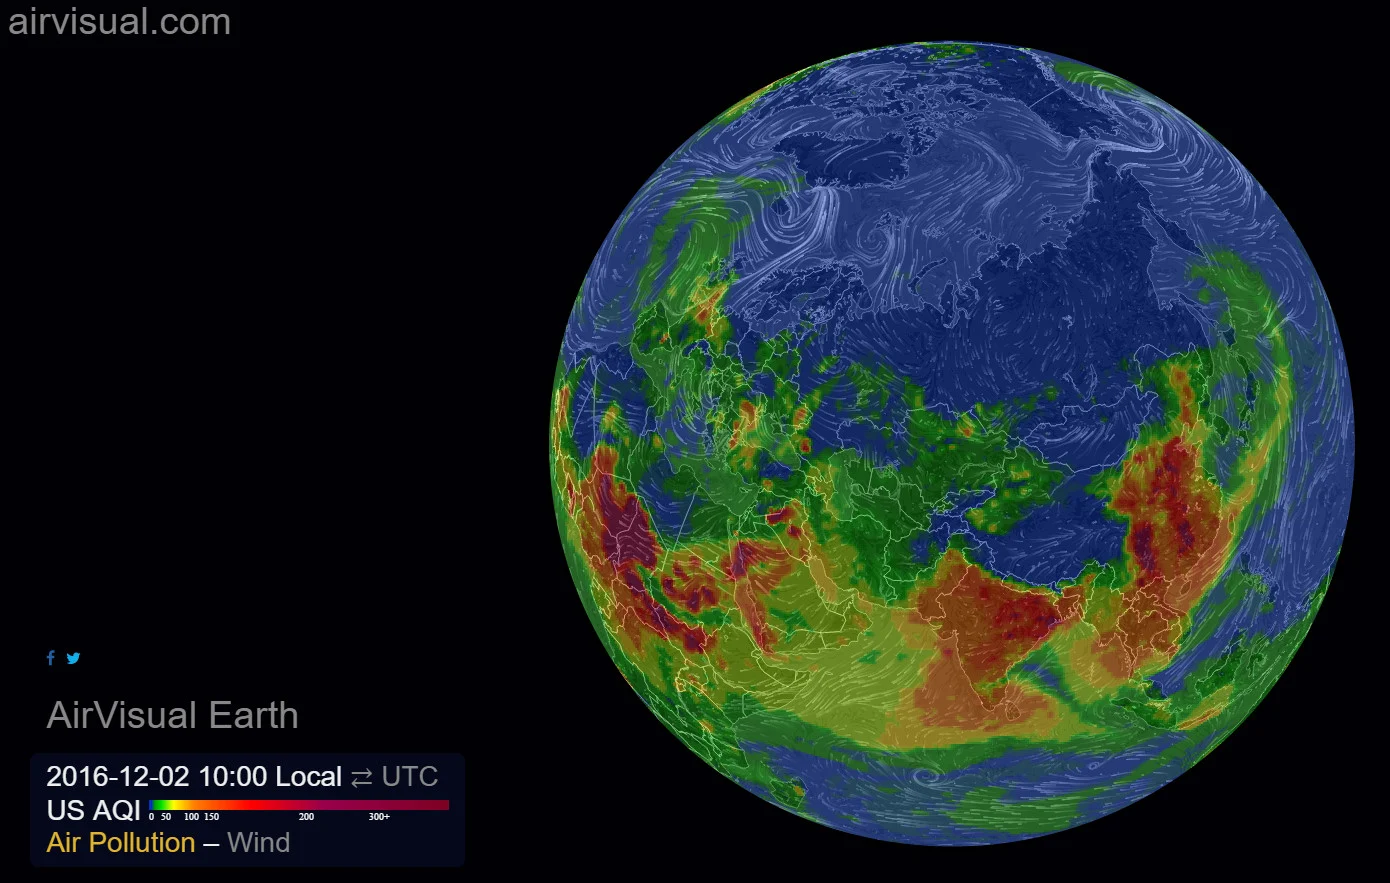 Air pollution flow across the planet in real time